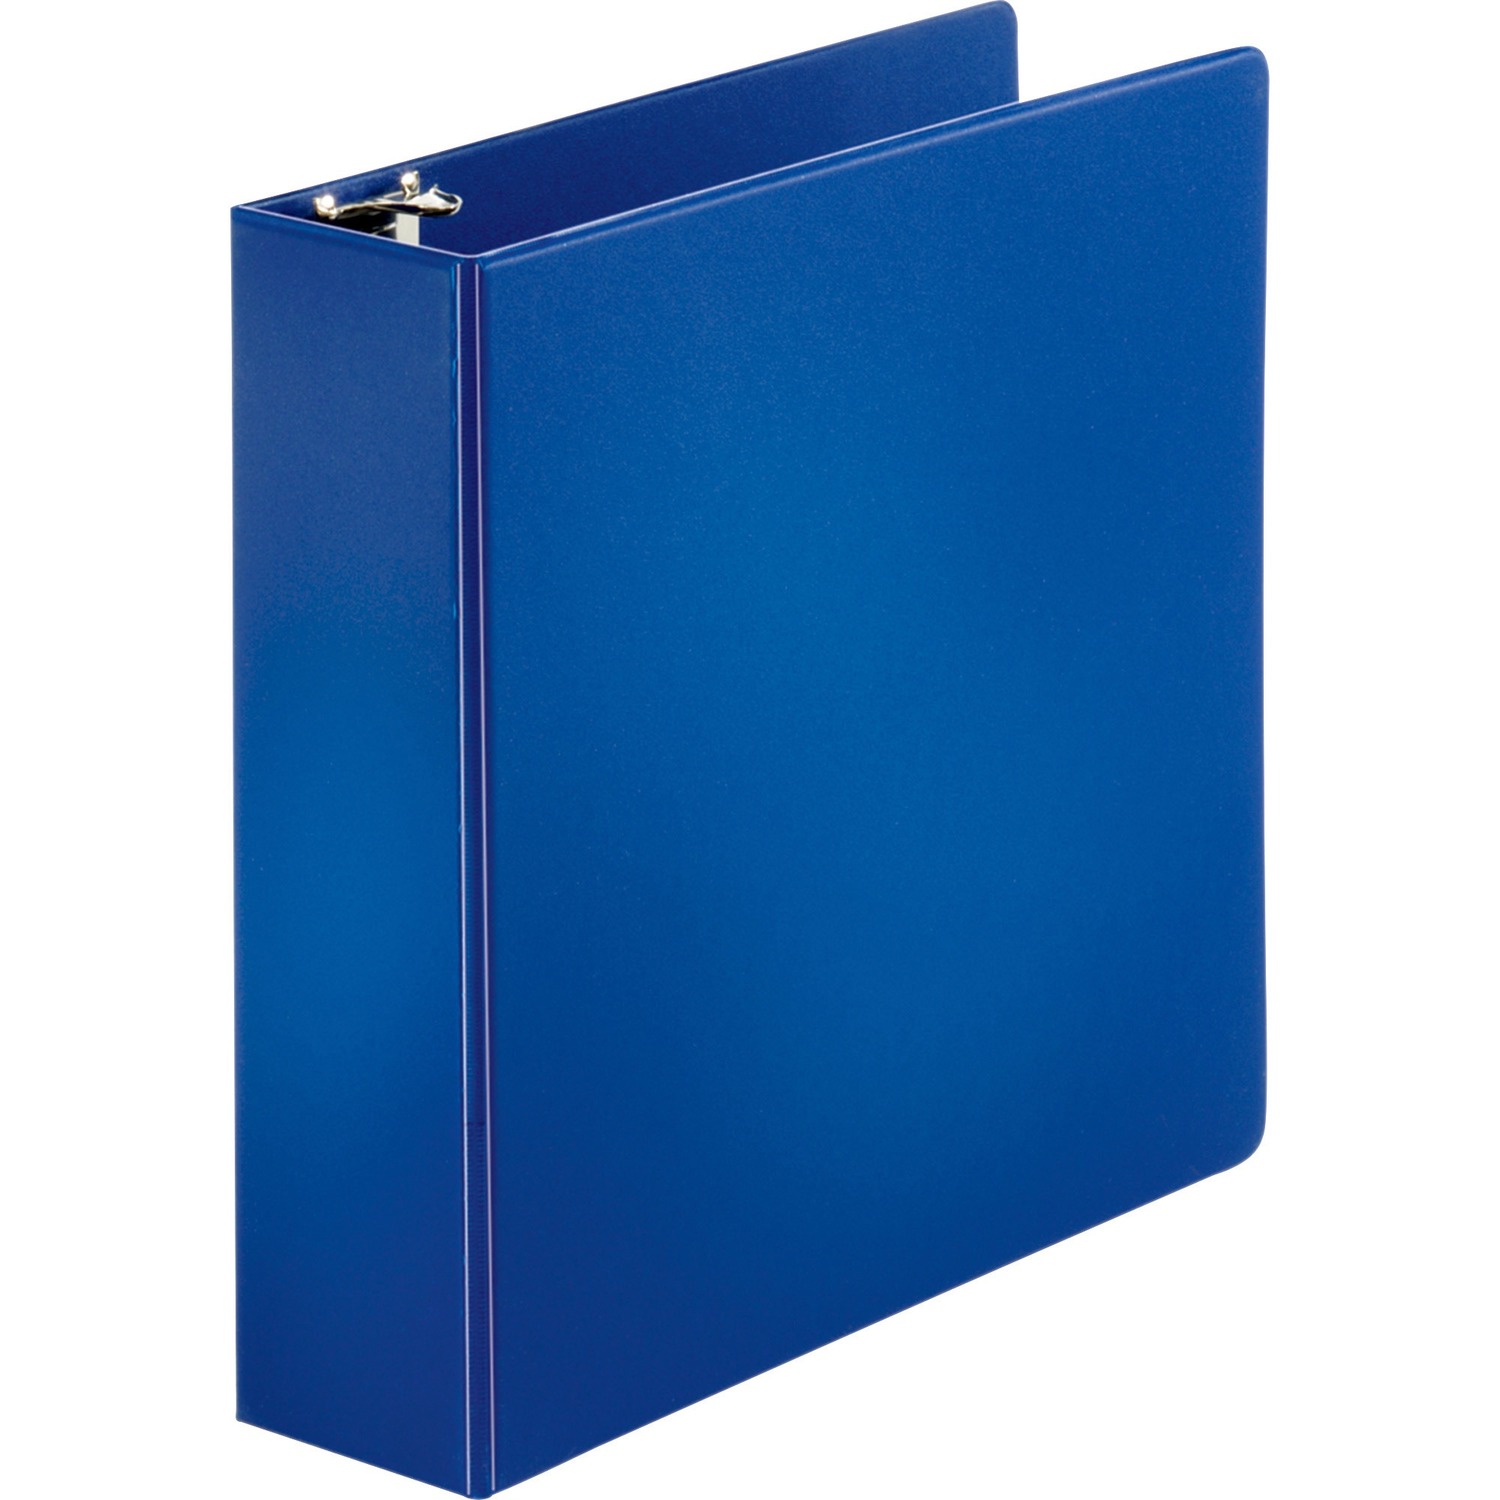 sp-richards-sparco-78-recycled-3-ring-binder-3-capacity-blue